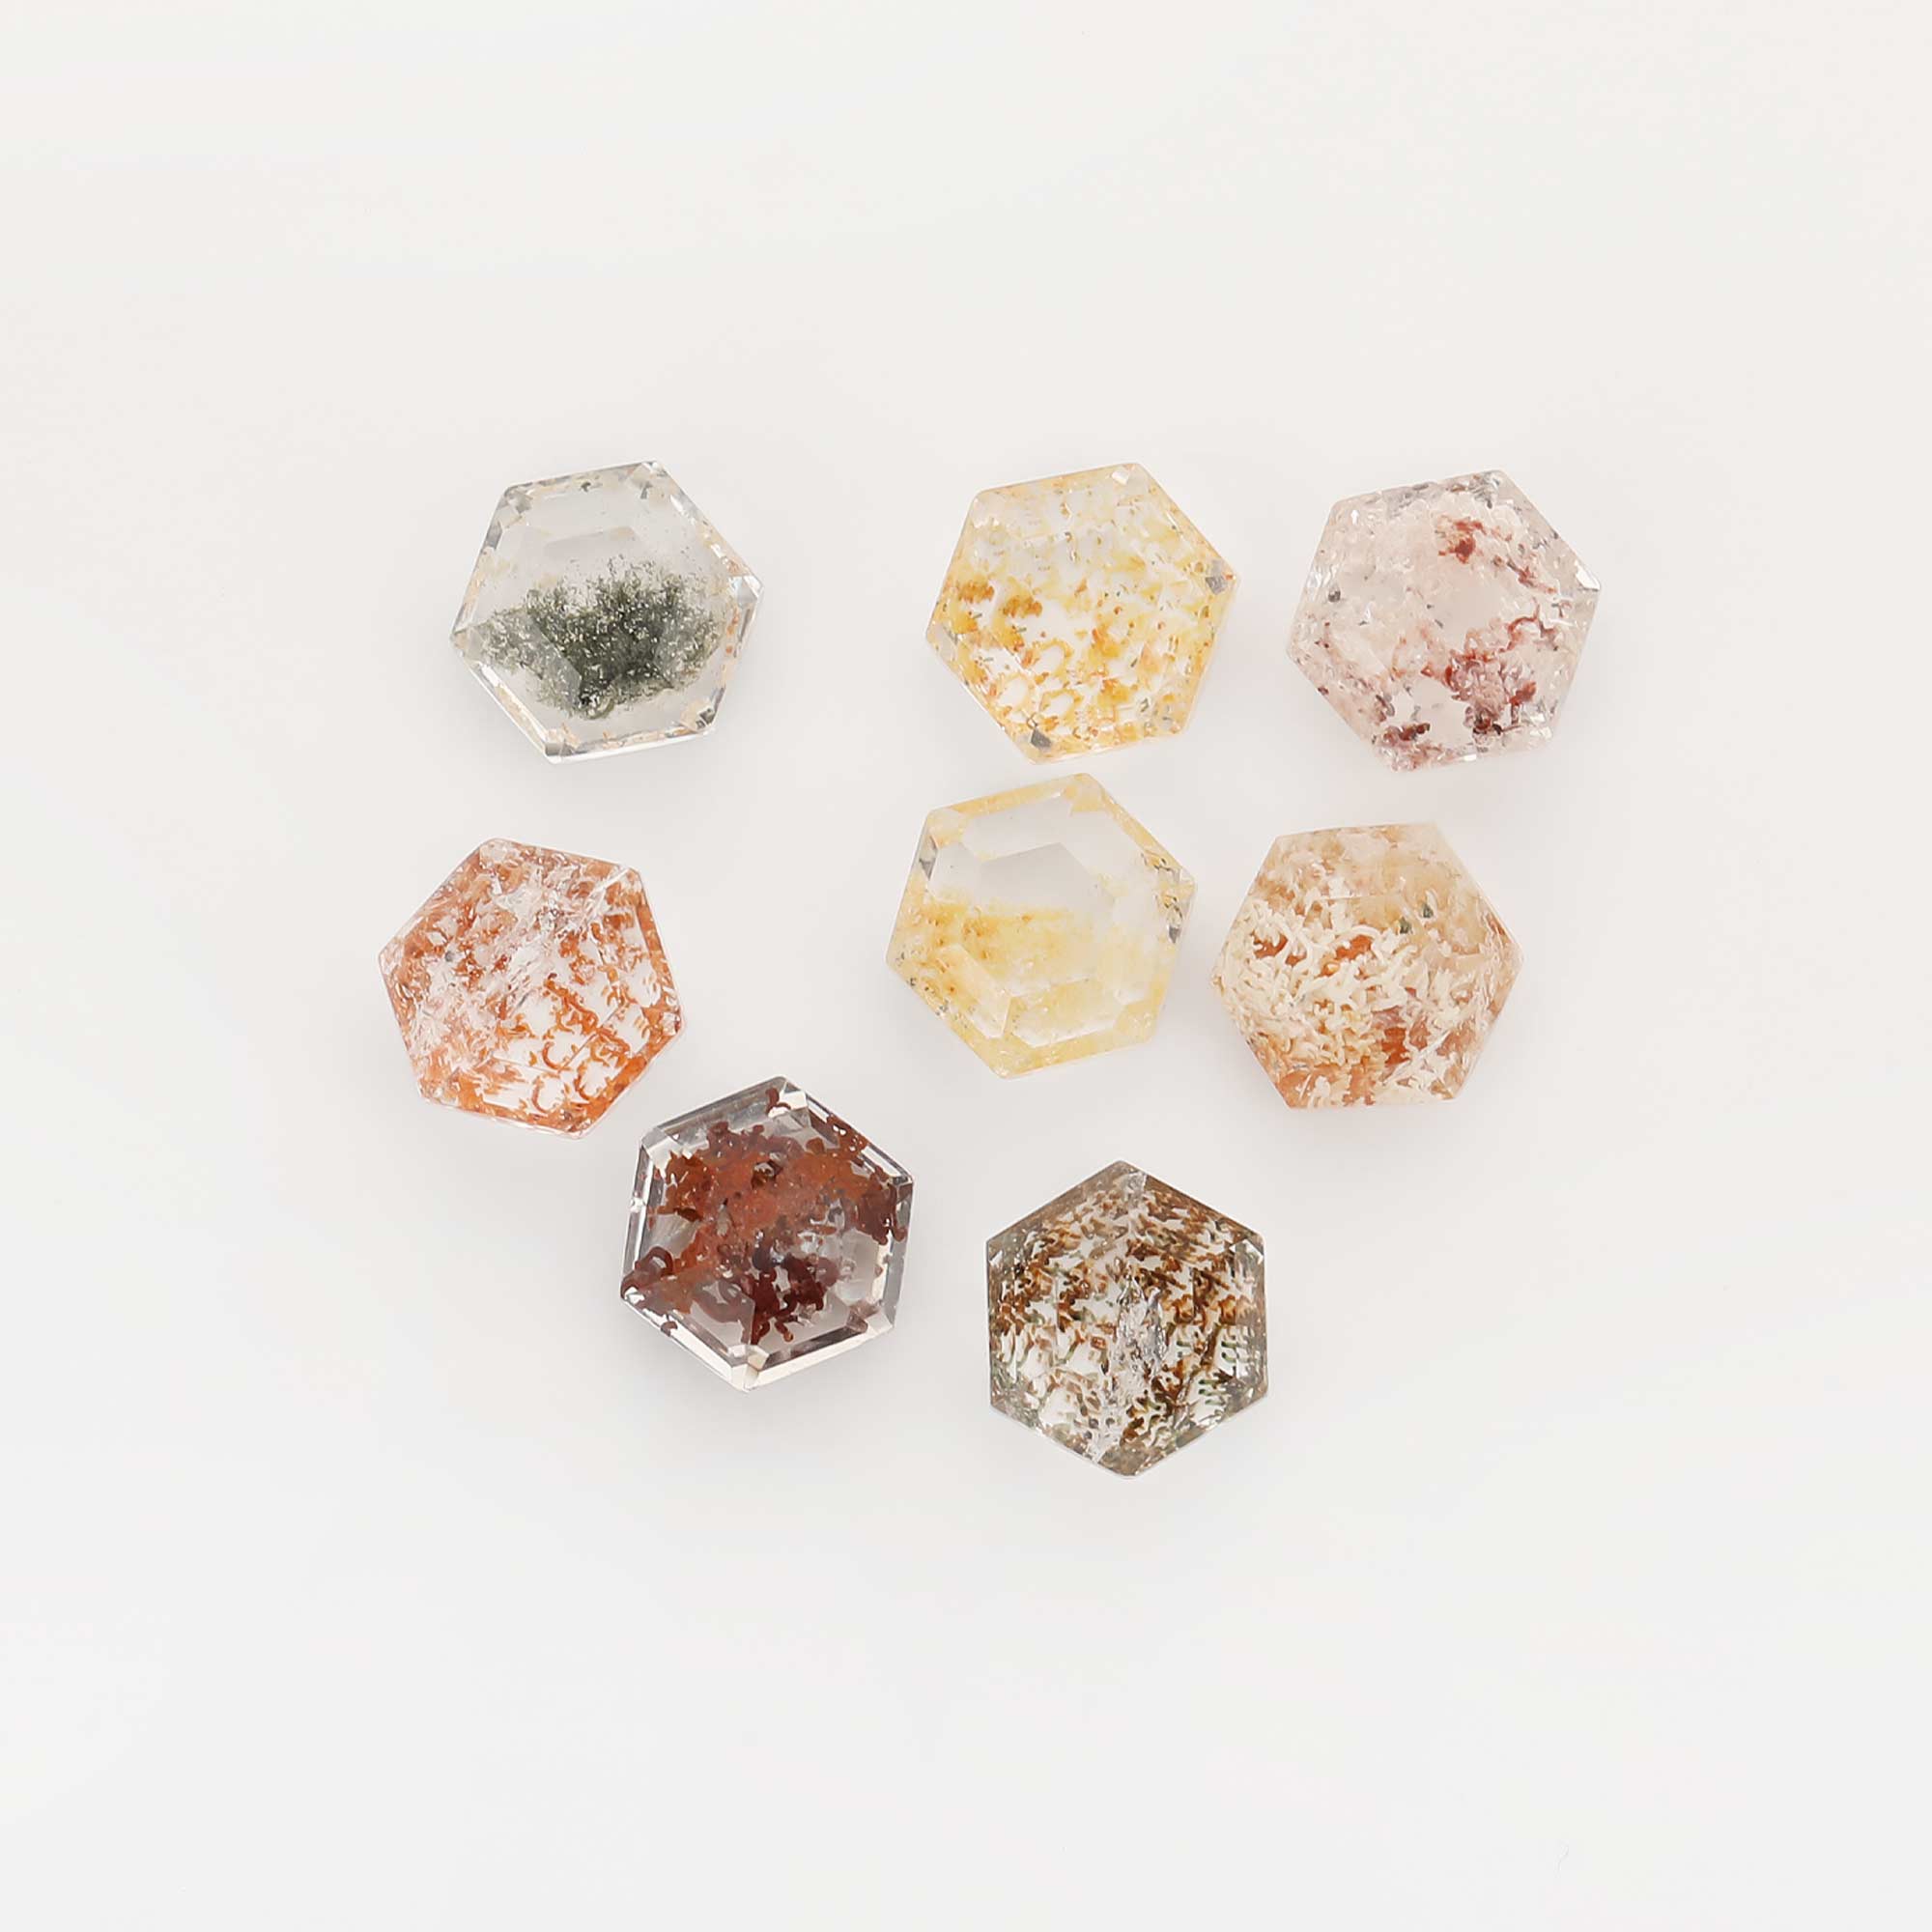 6MM Hexagon Salt and Pepper Herkimer Diamond Crystal,Cluster Crystal Quartz Faceted Stone,Ghost Phantom Crystal,Unique Gemstone,DIY Jewelry Supplies 4160069 - Click Image to Close